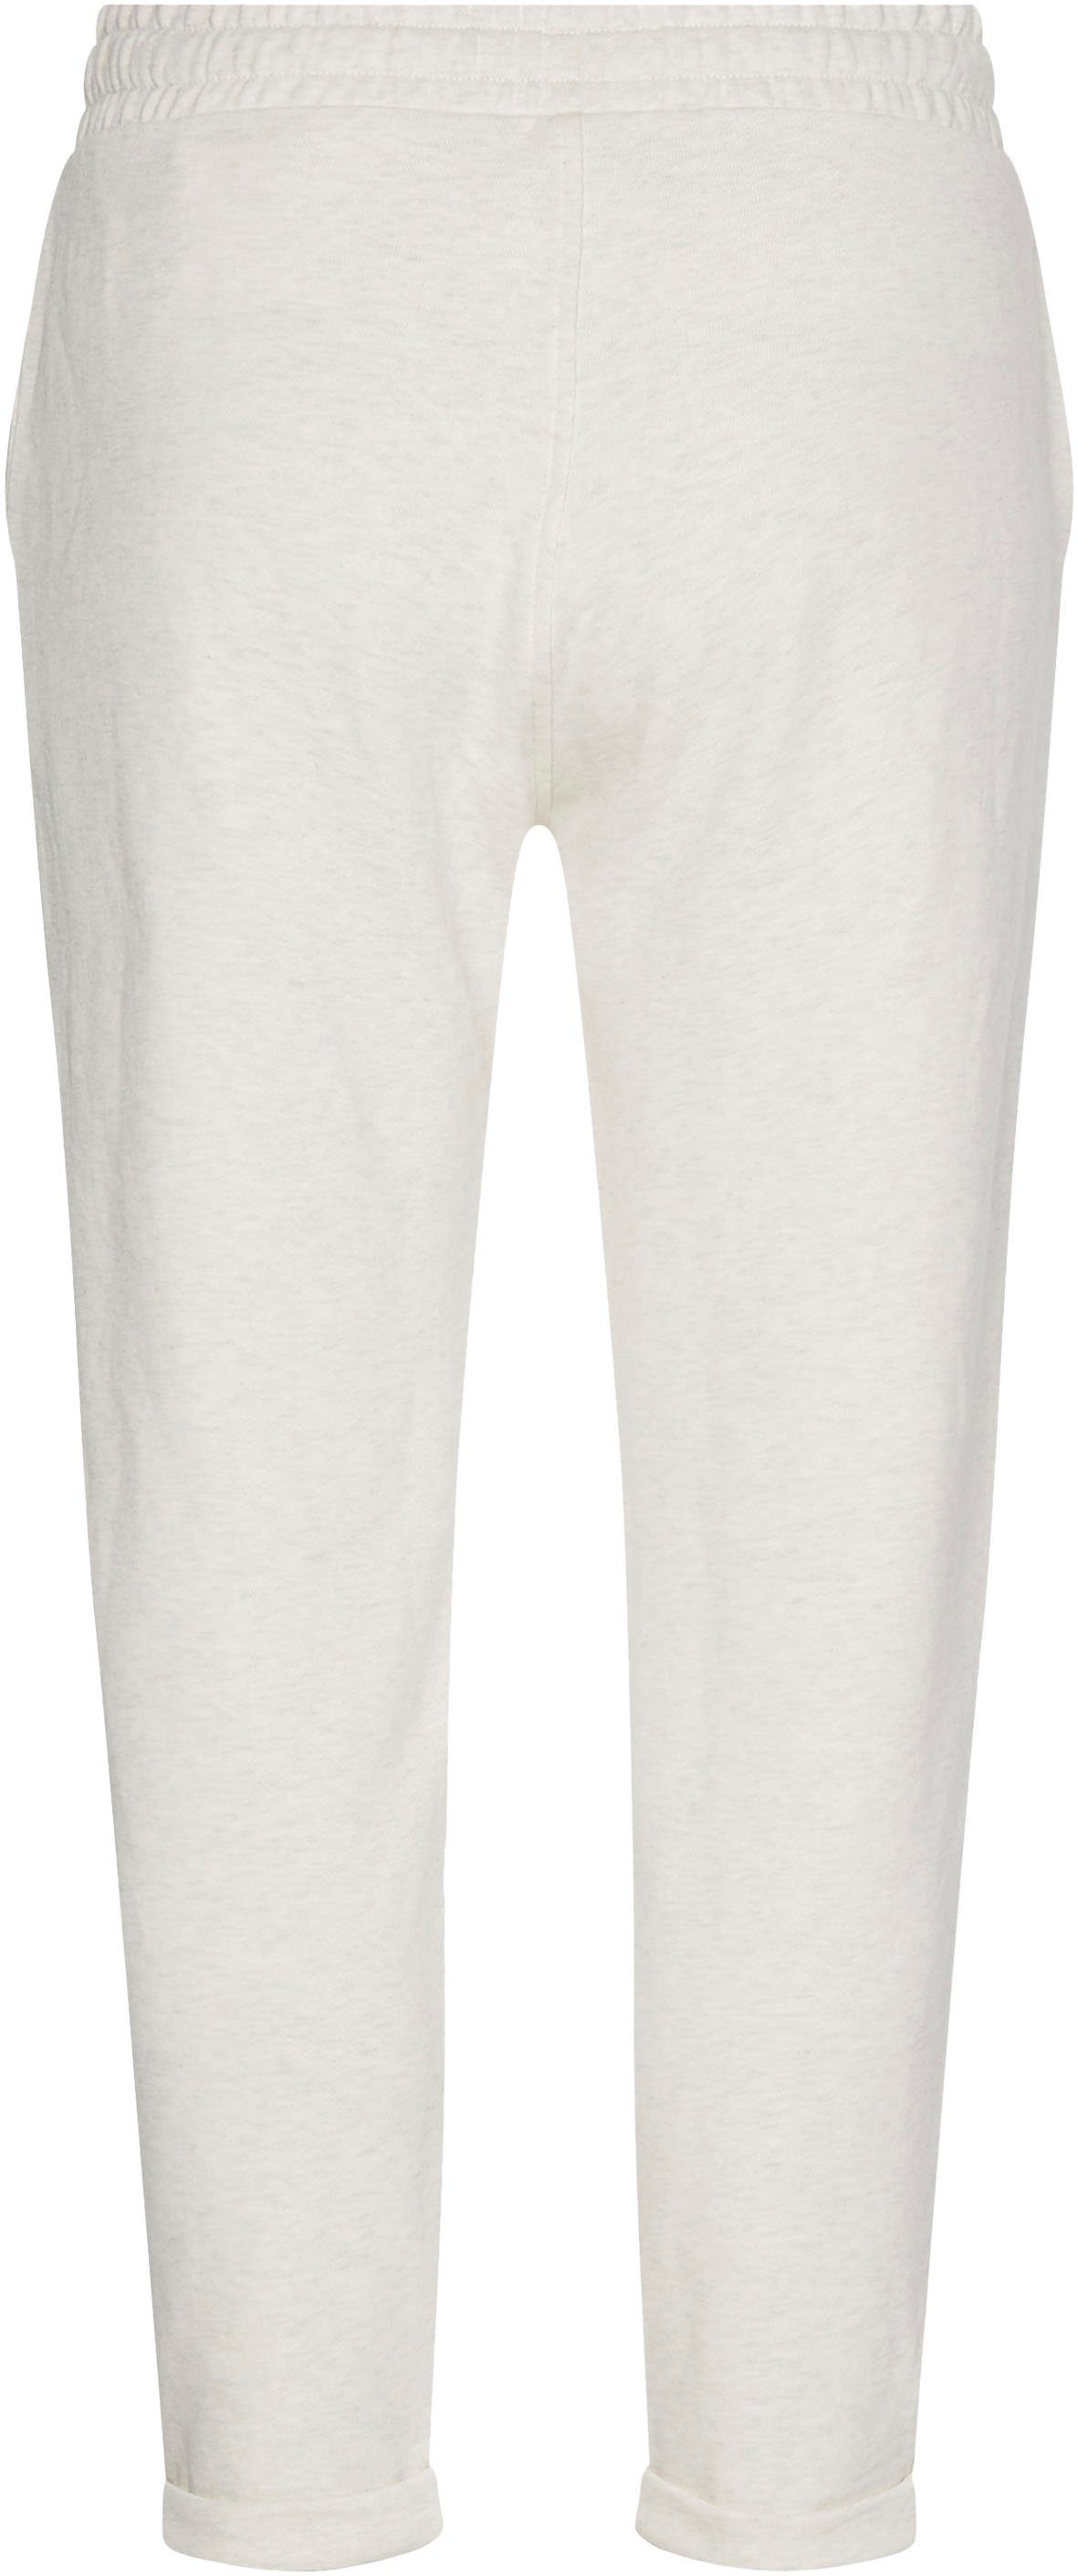 Tommy Hilfiger Sweatpants White-Heather Tommy Hilfiger Markenlabel ROUNDALL NYC mit TAPERED SWEATPANTS